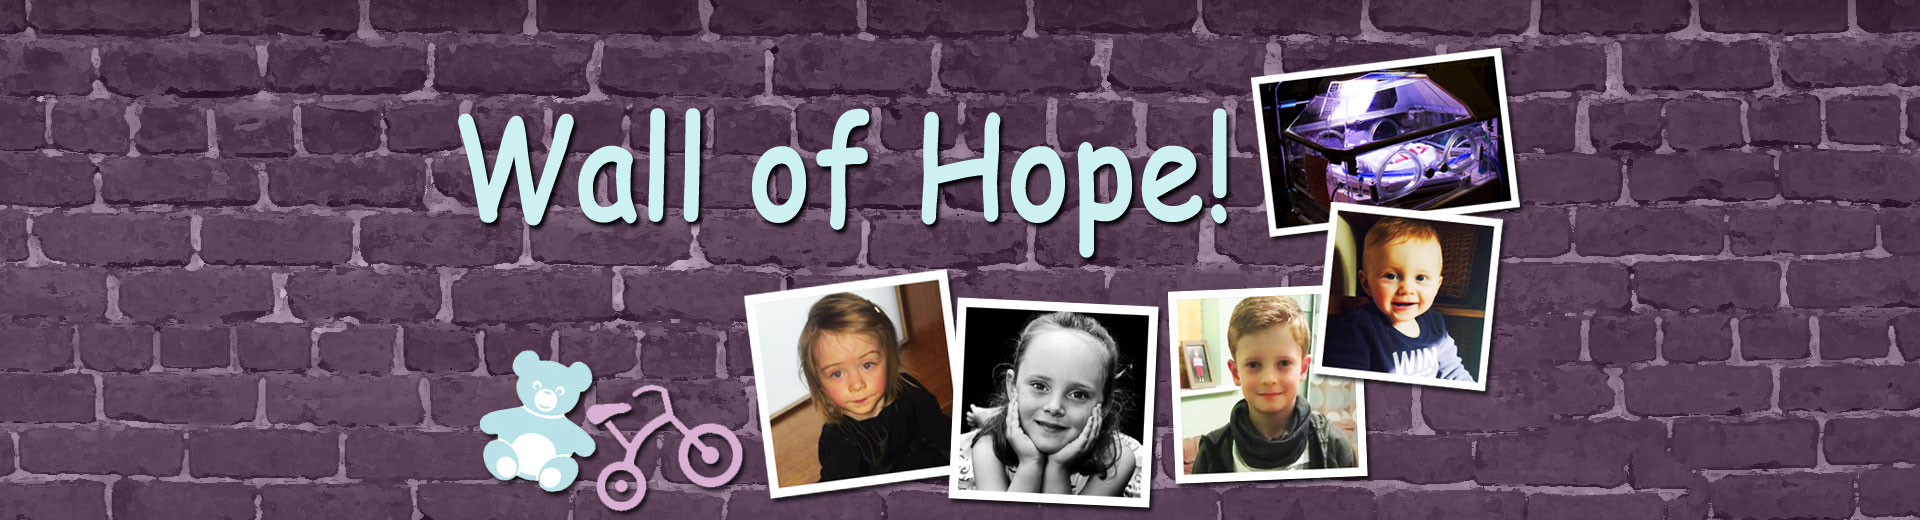 INHA Wall of Hope Head - includes photos of children who were born prematurely